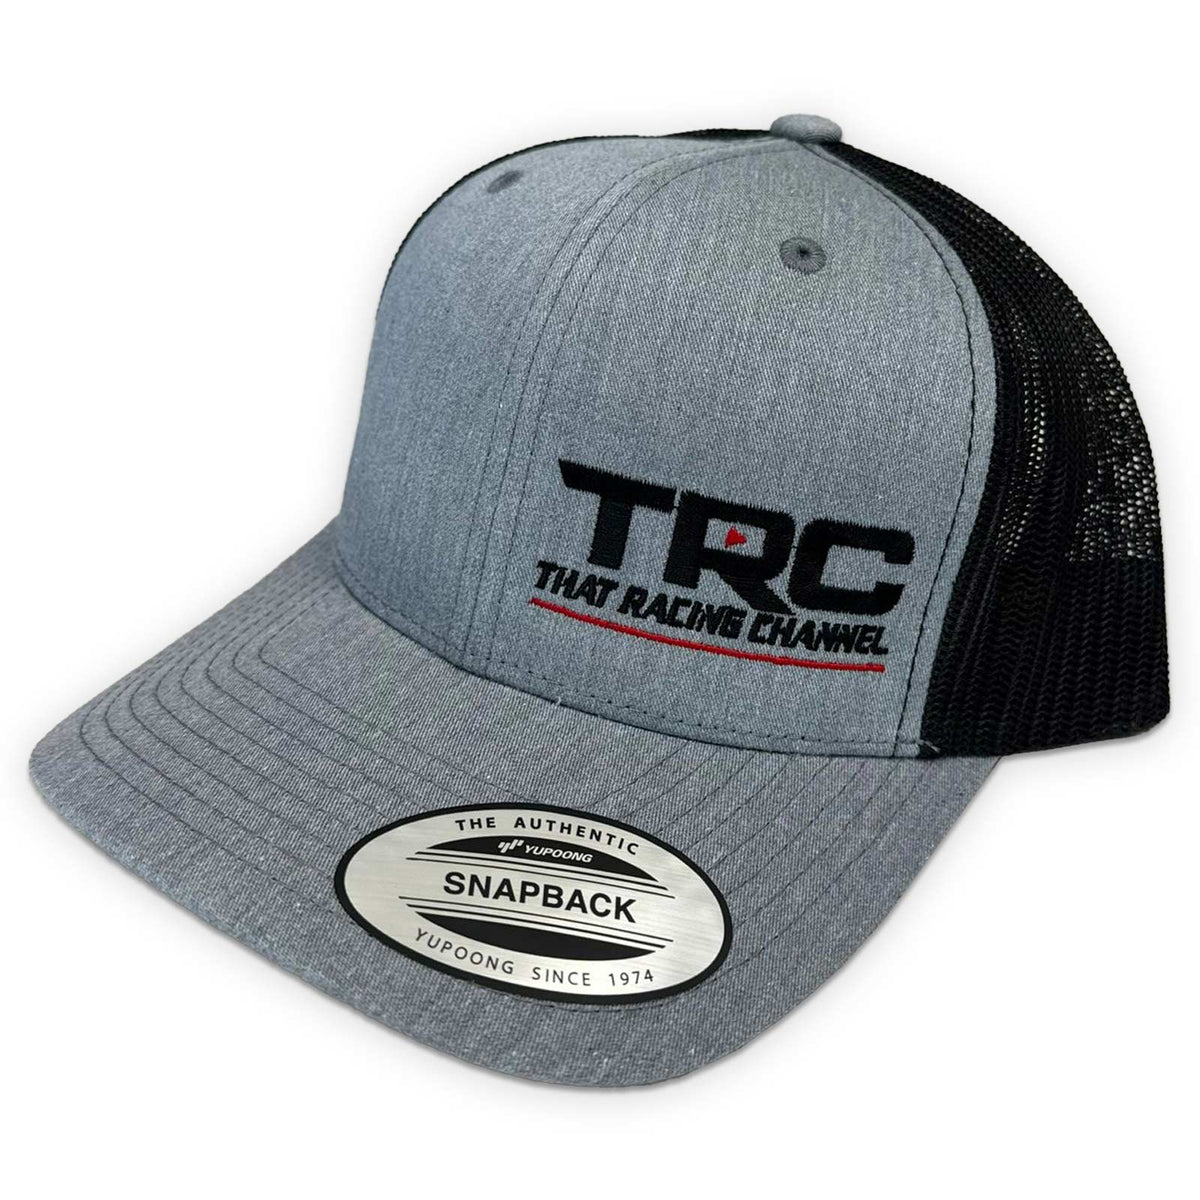 TRC Hat - That Racing Channel